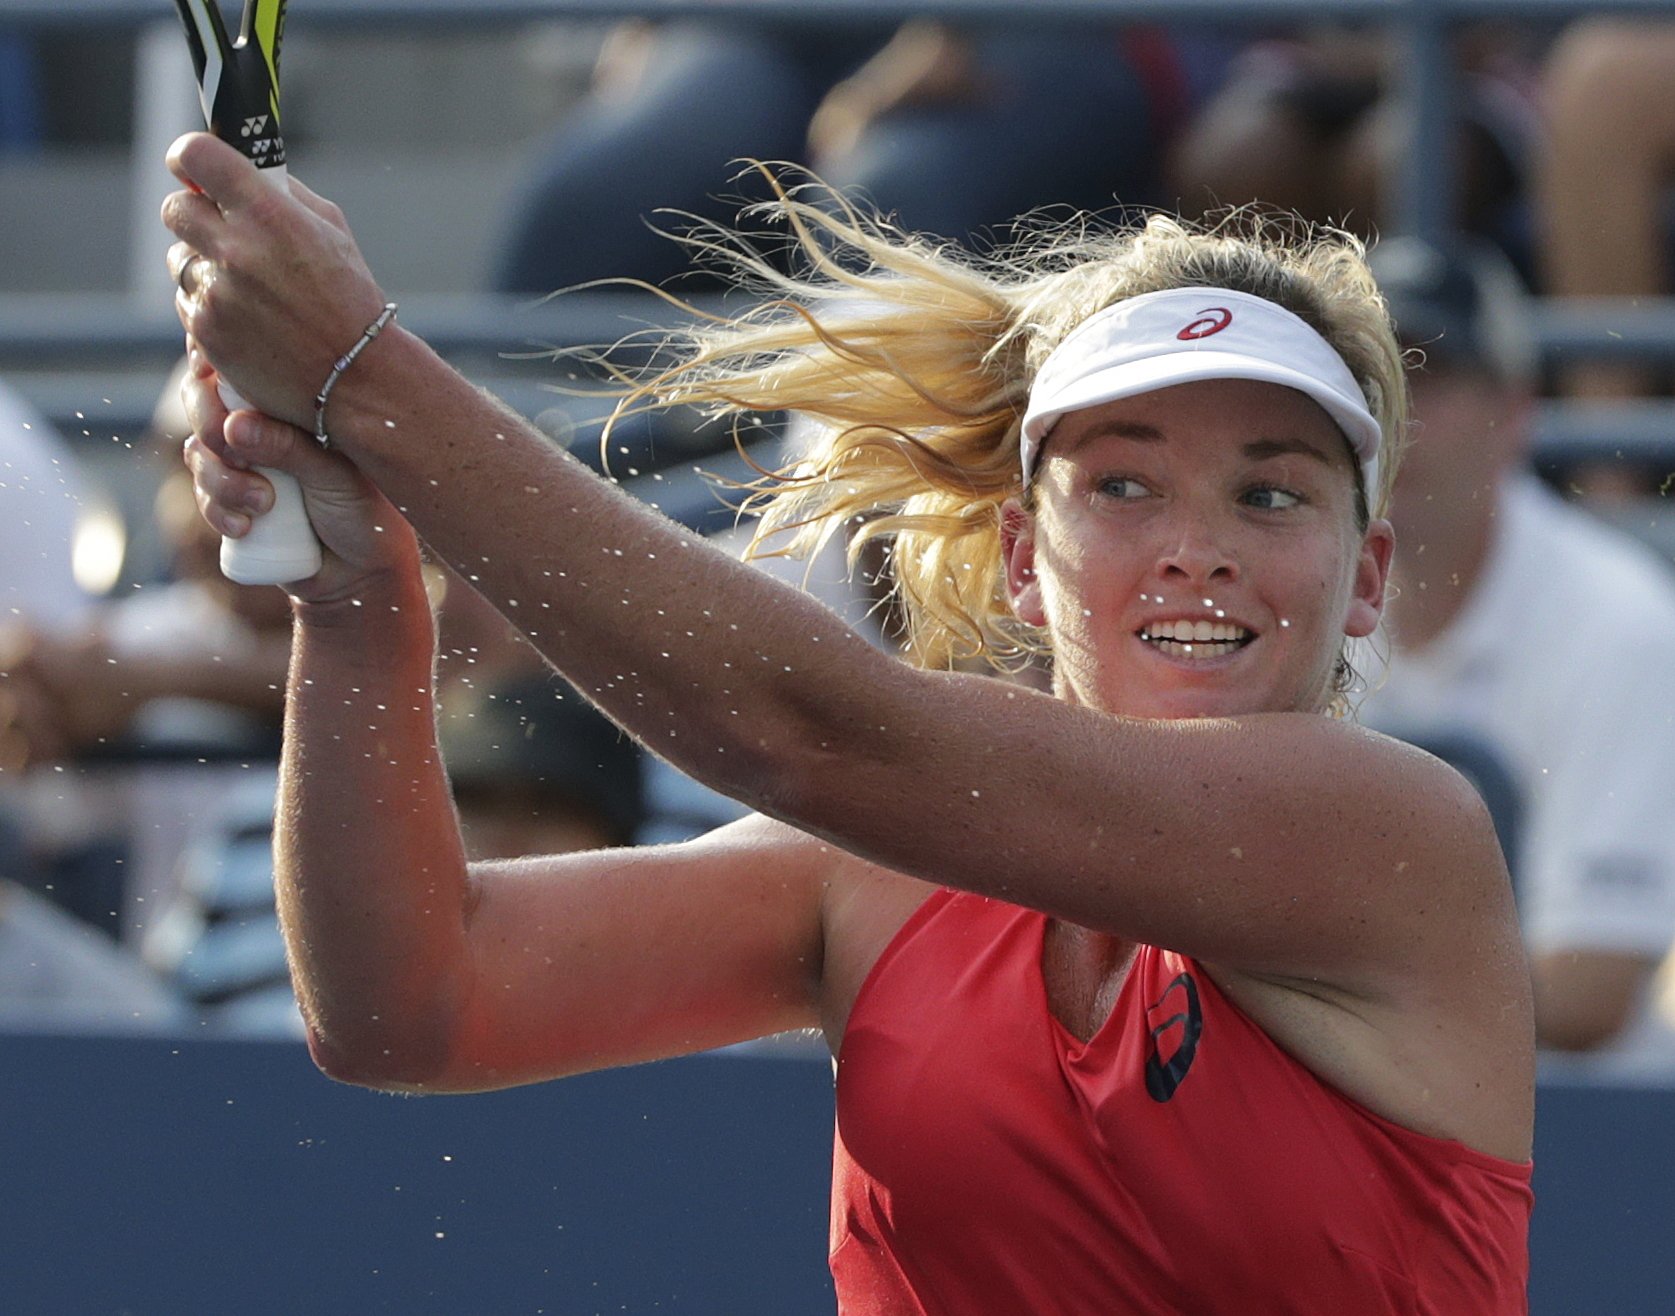 Coco Vandeweghe said she could not remember what she said in the interview. Photo: AP